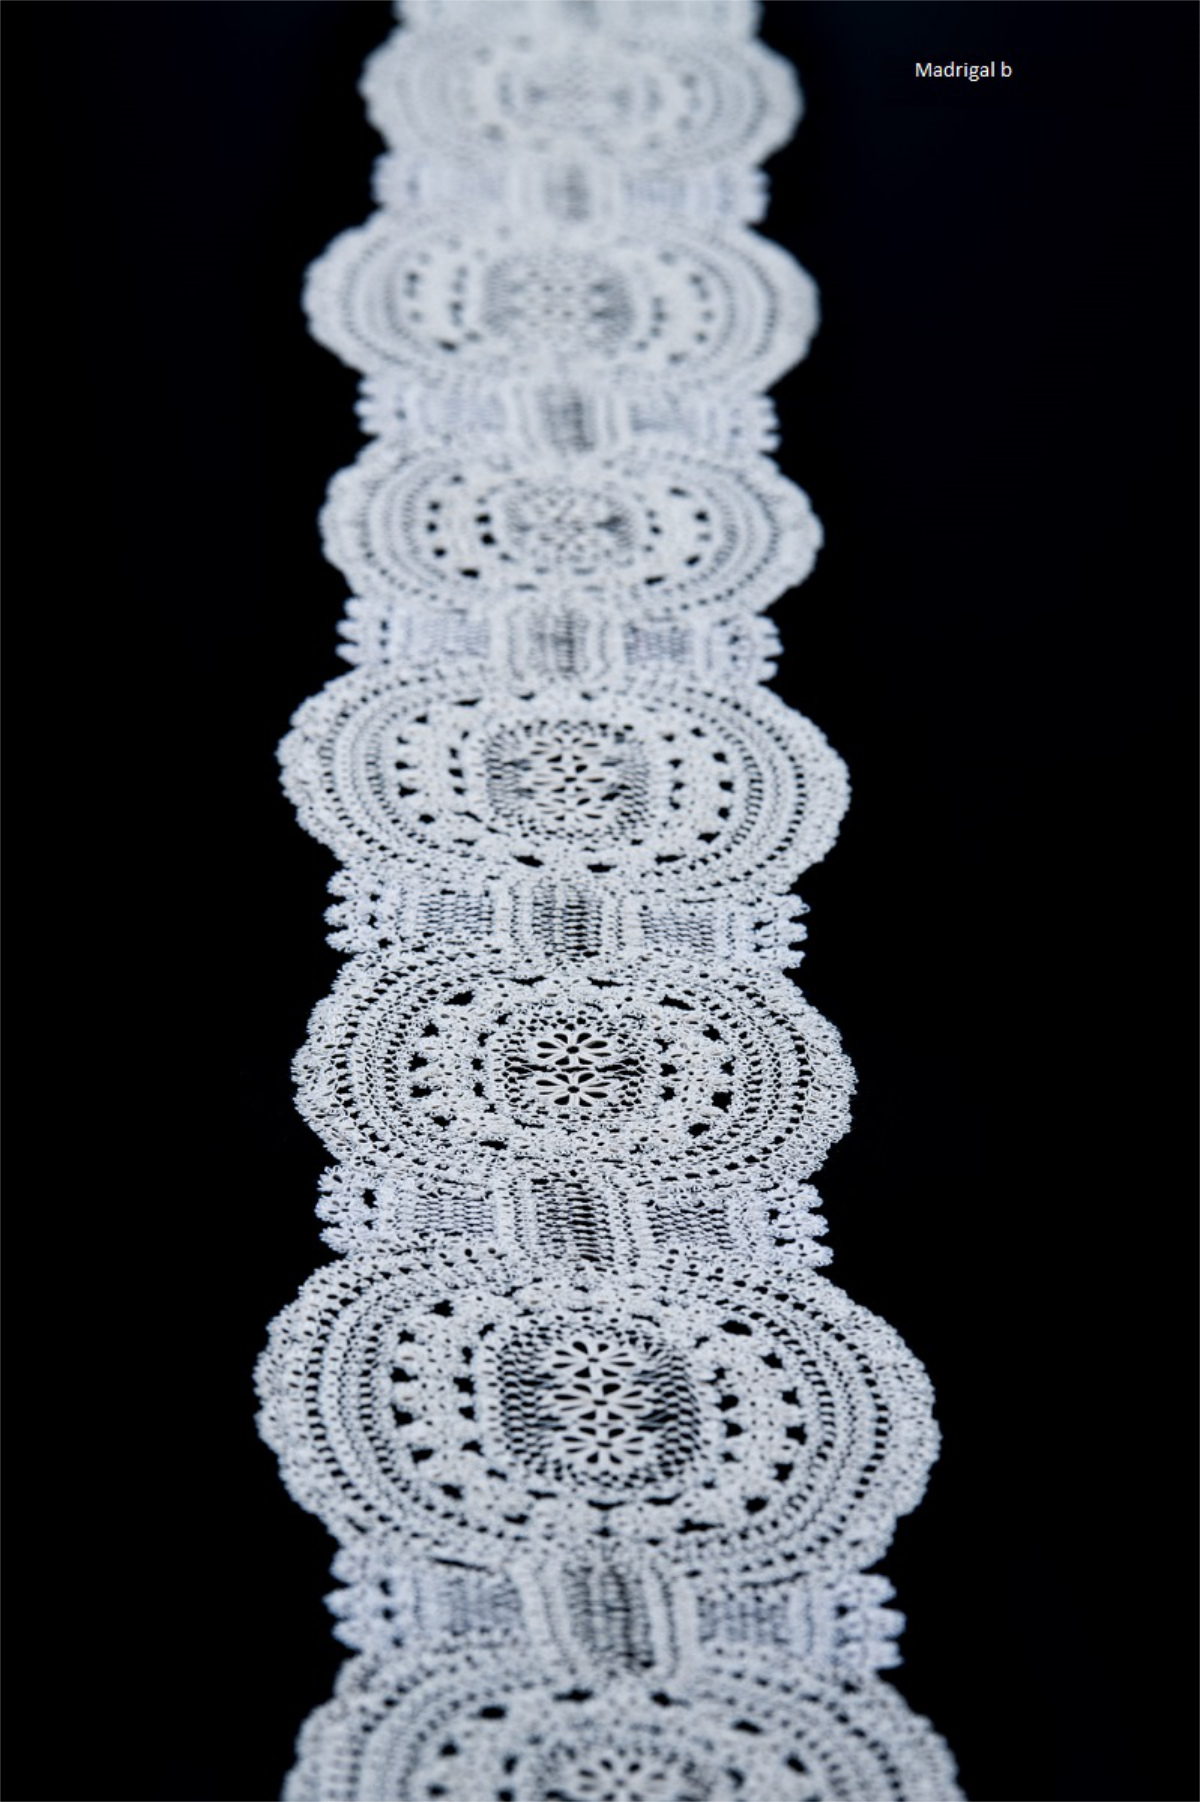 Support Living Heritage In Textil Art: The Lace And The Mosaic Of Pearls